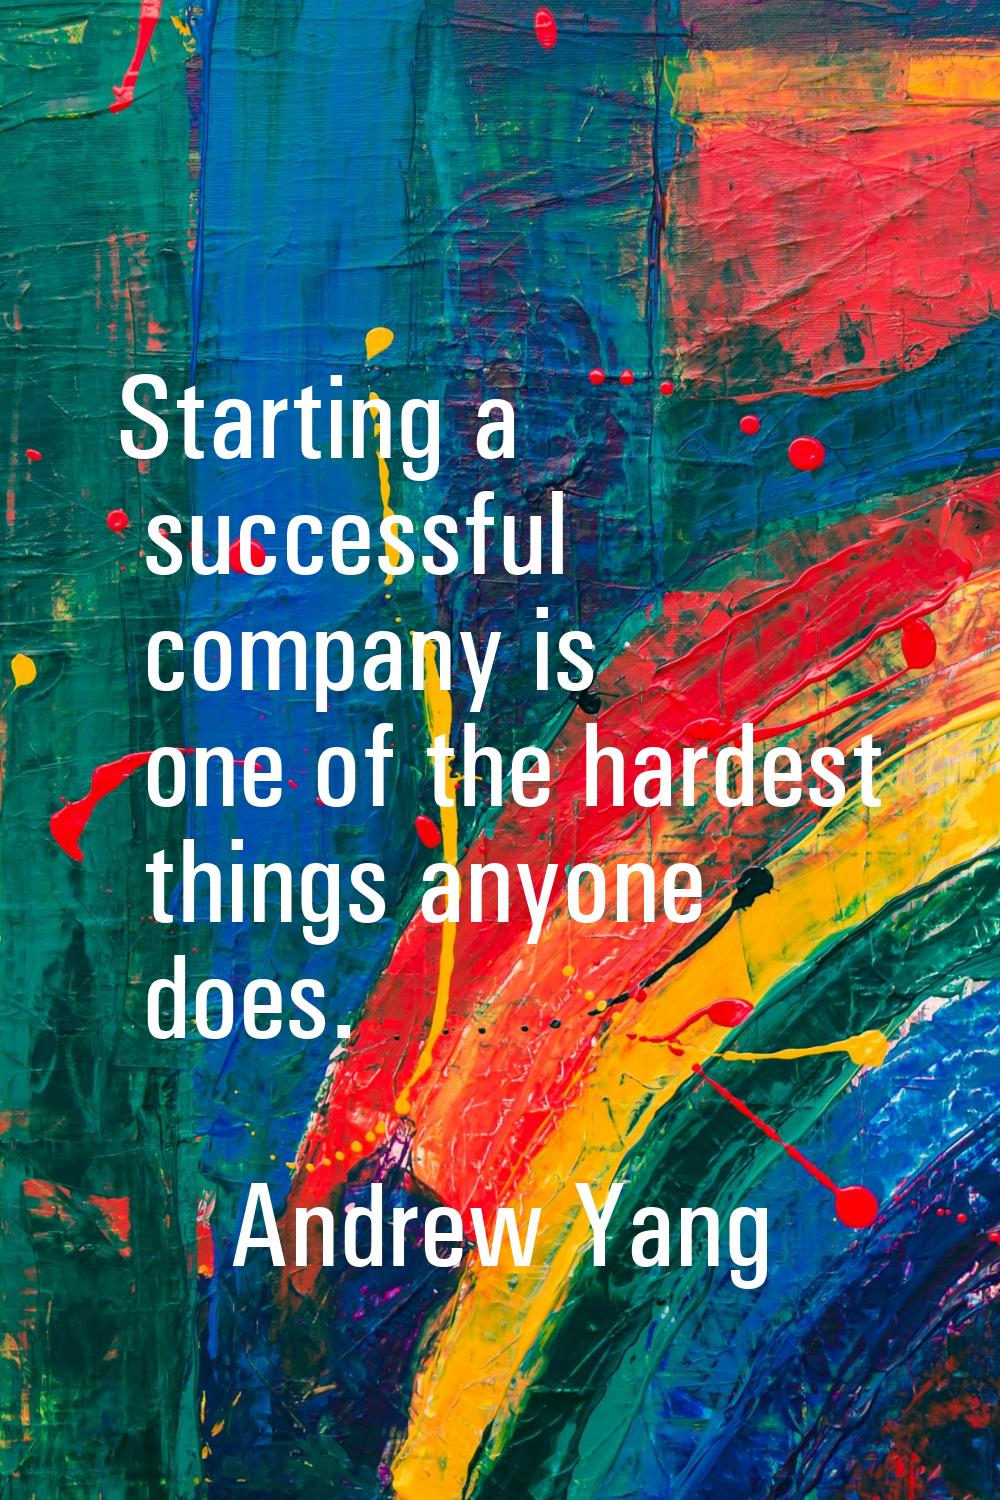 Starting a successful company is one of the hardest things anyone does.